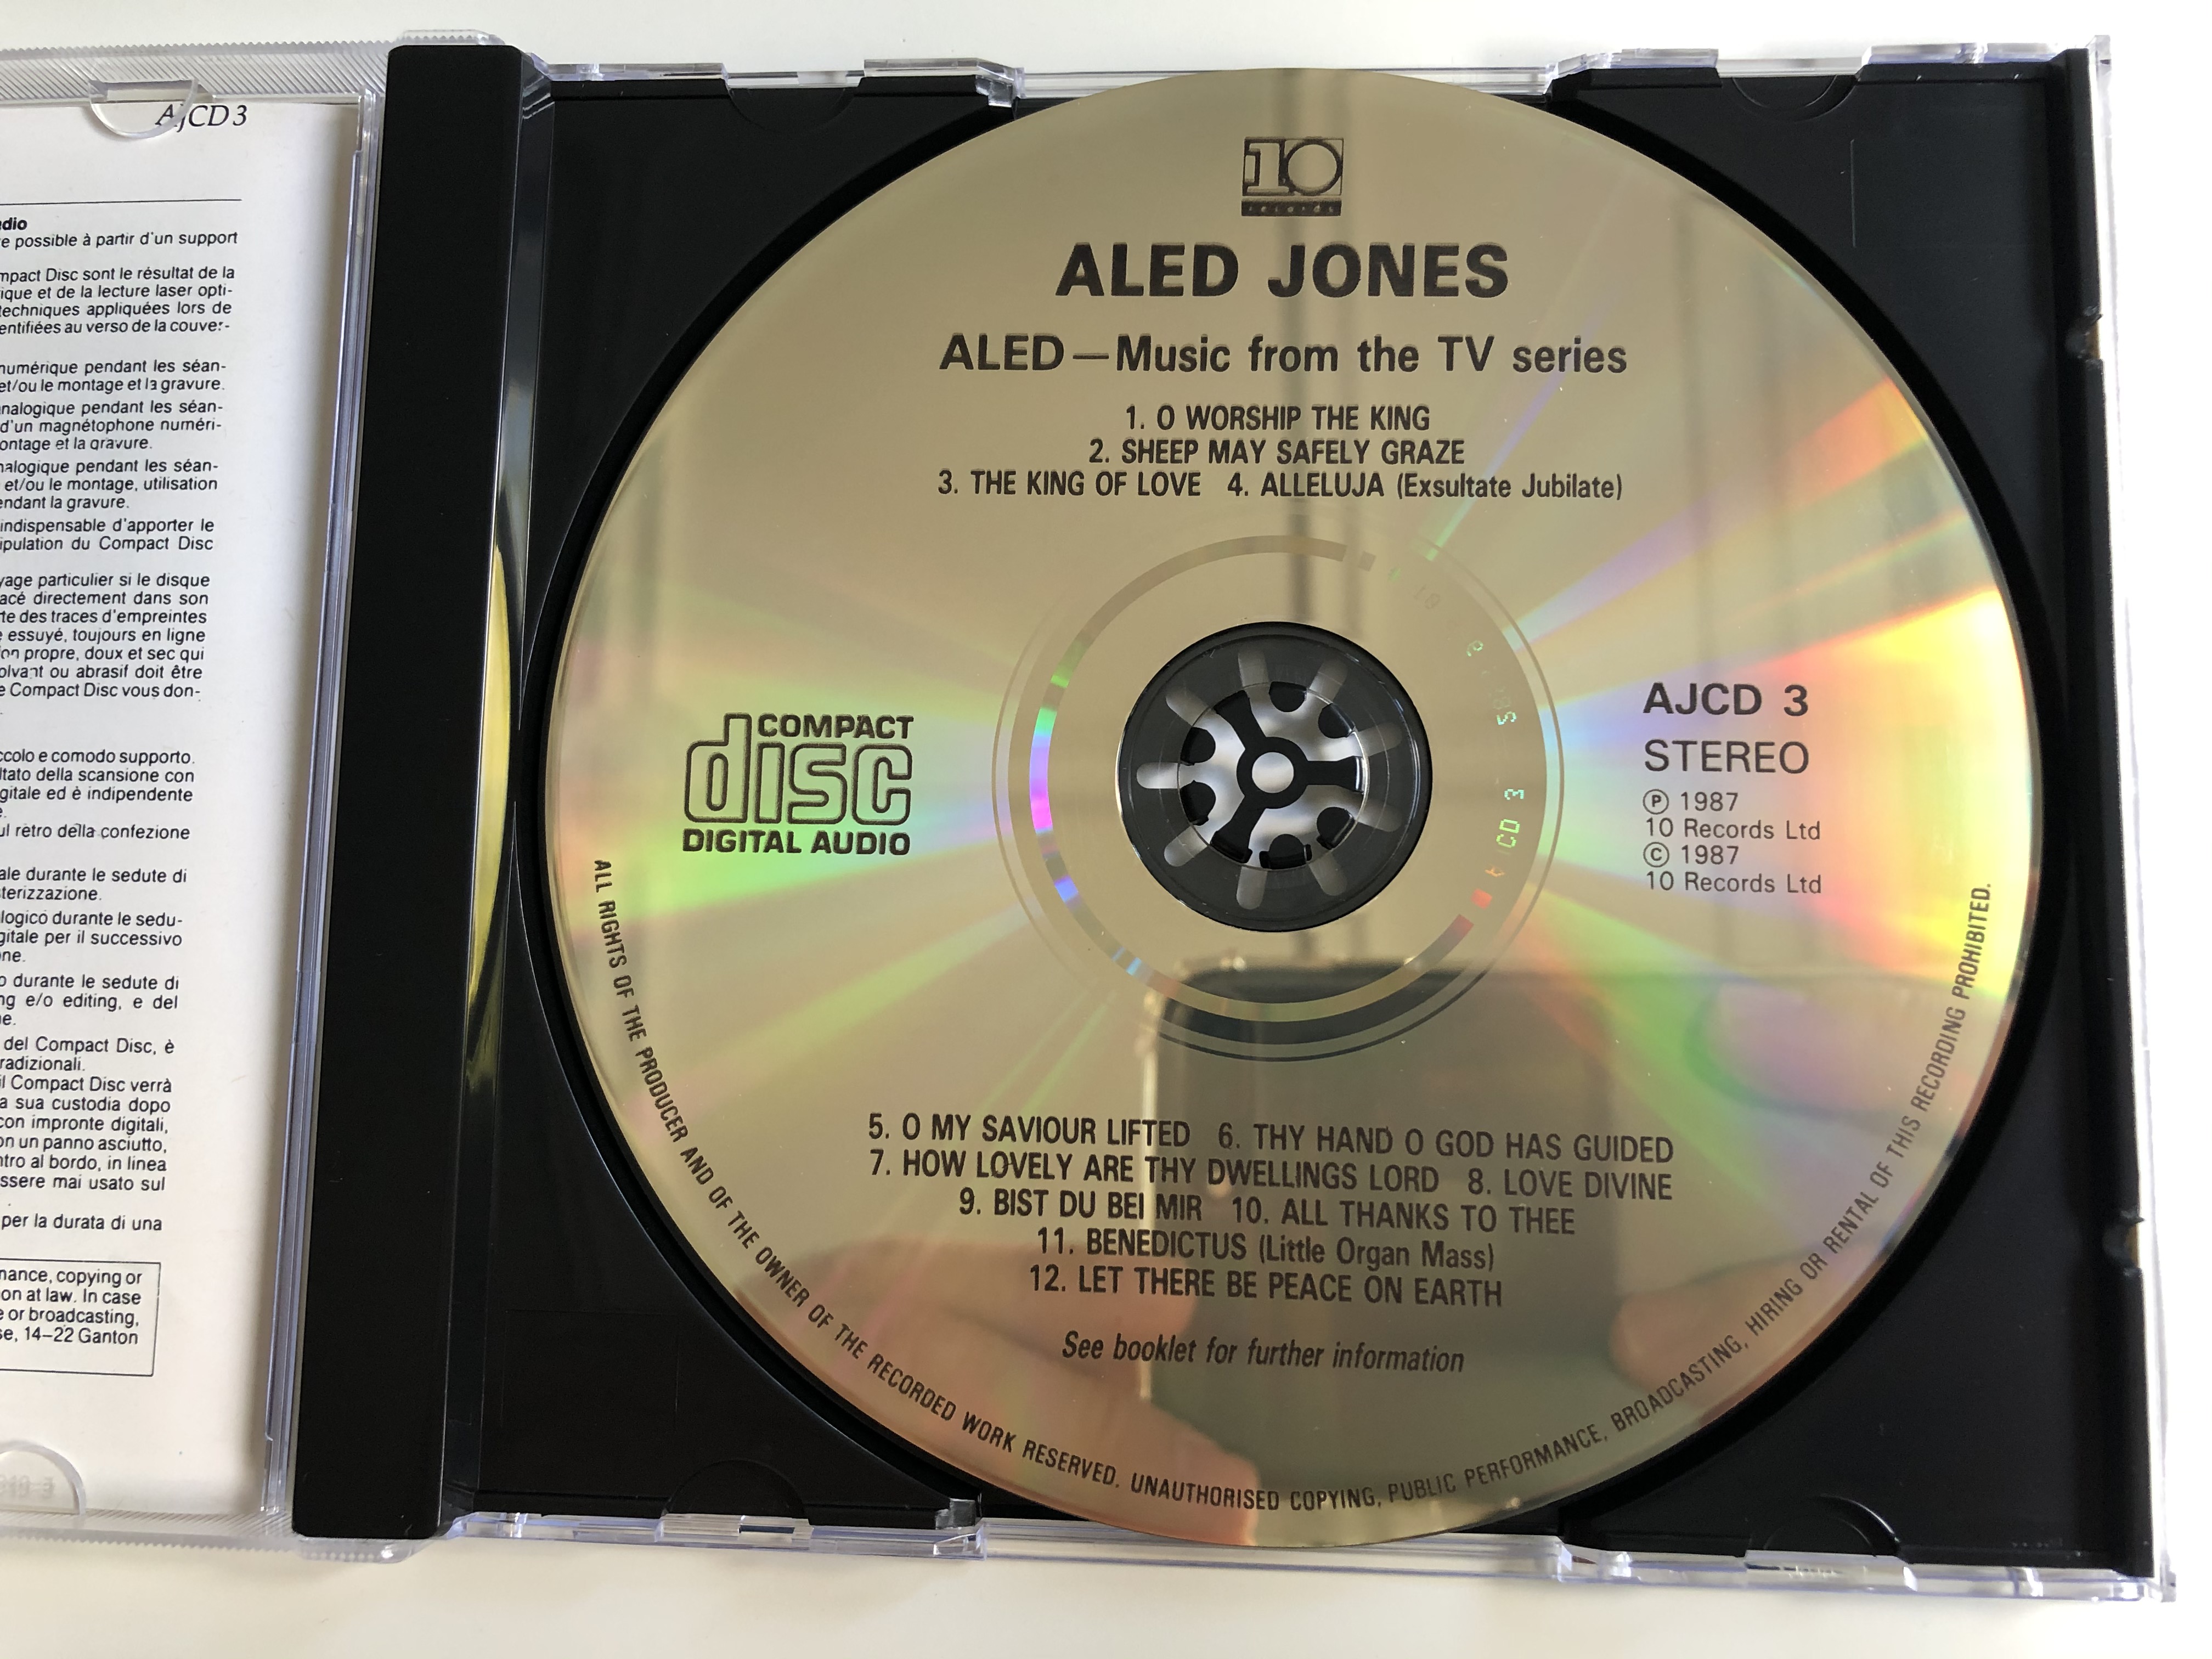 aled-music-from-the-tv-series-recorded-summer-86-10-records-audio-cd-1987-ajcd-3-3-.jpg